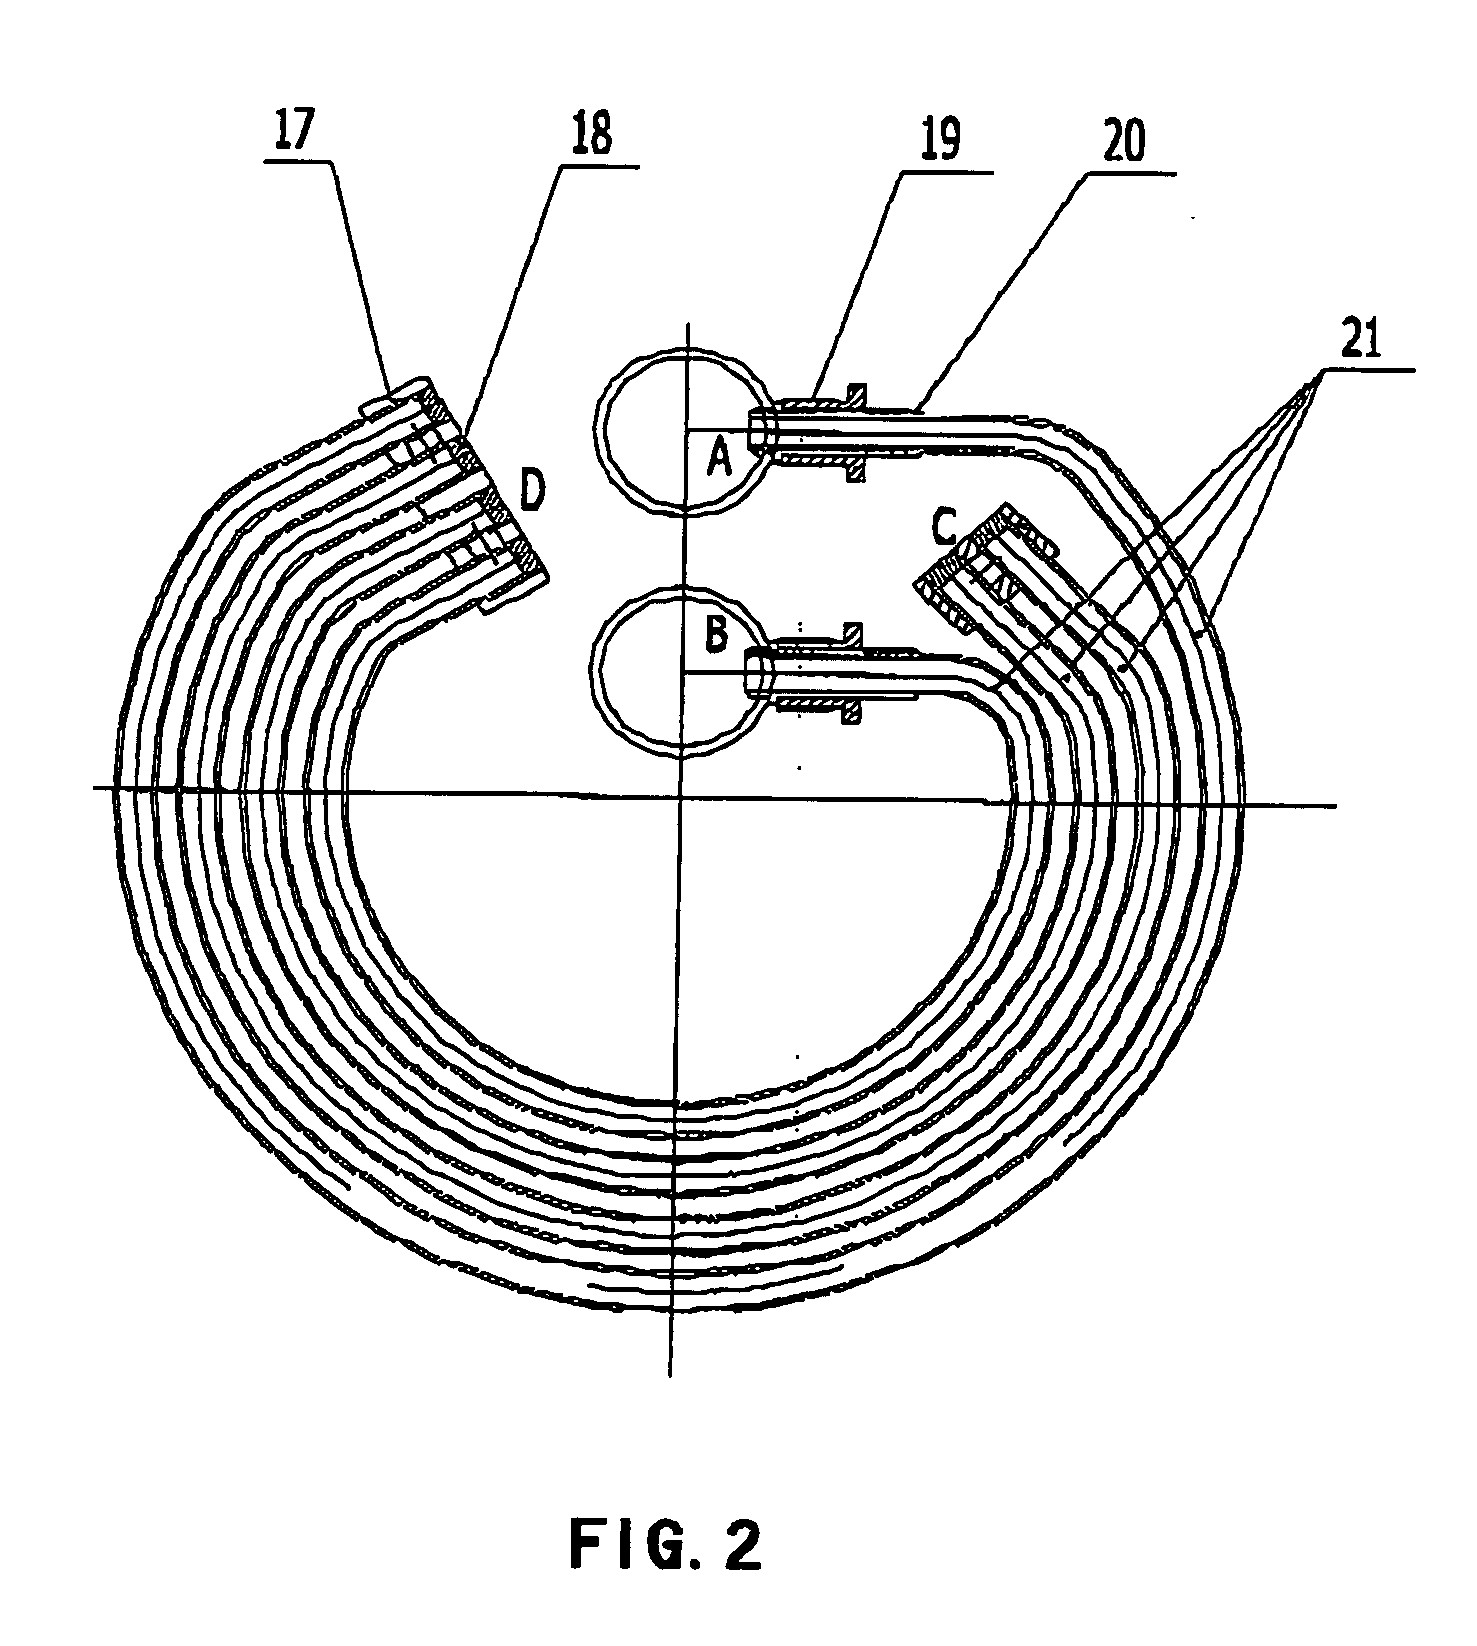 Complex flow-path heat exchanger having U-shaped tube and cantilever combined coil